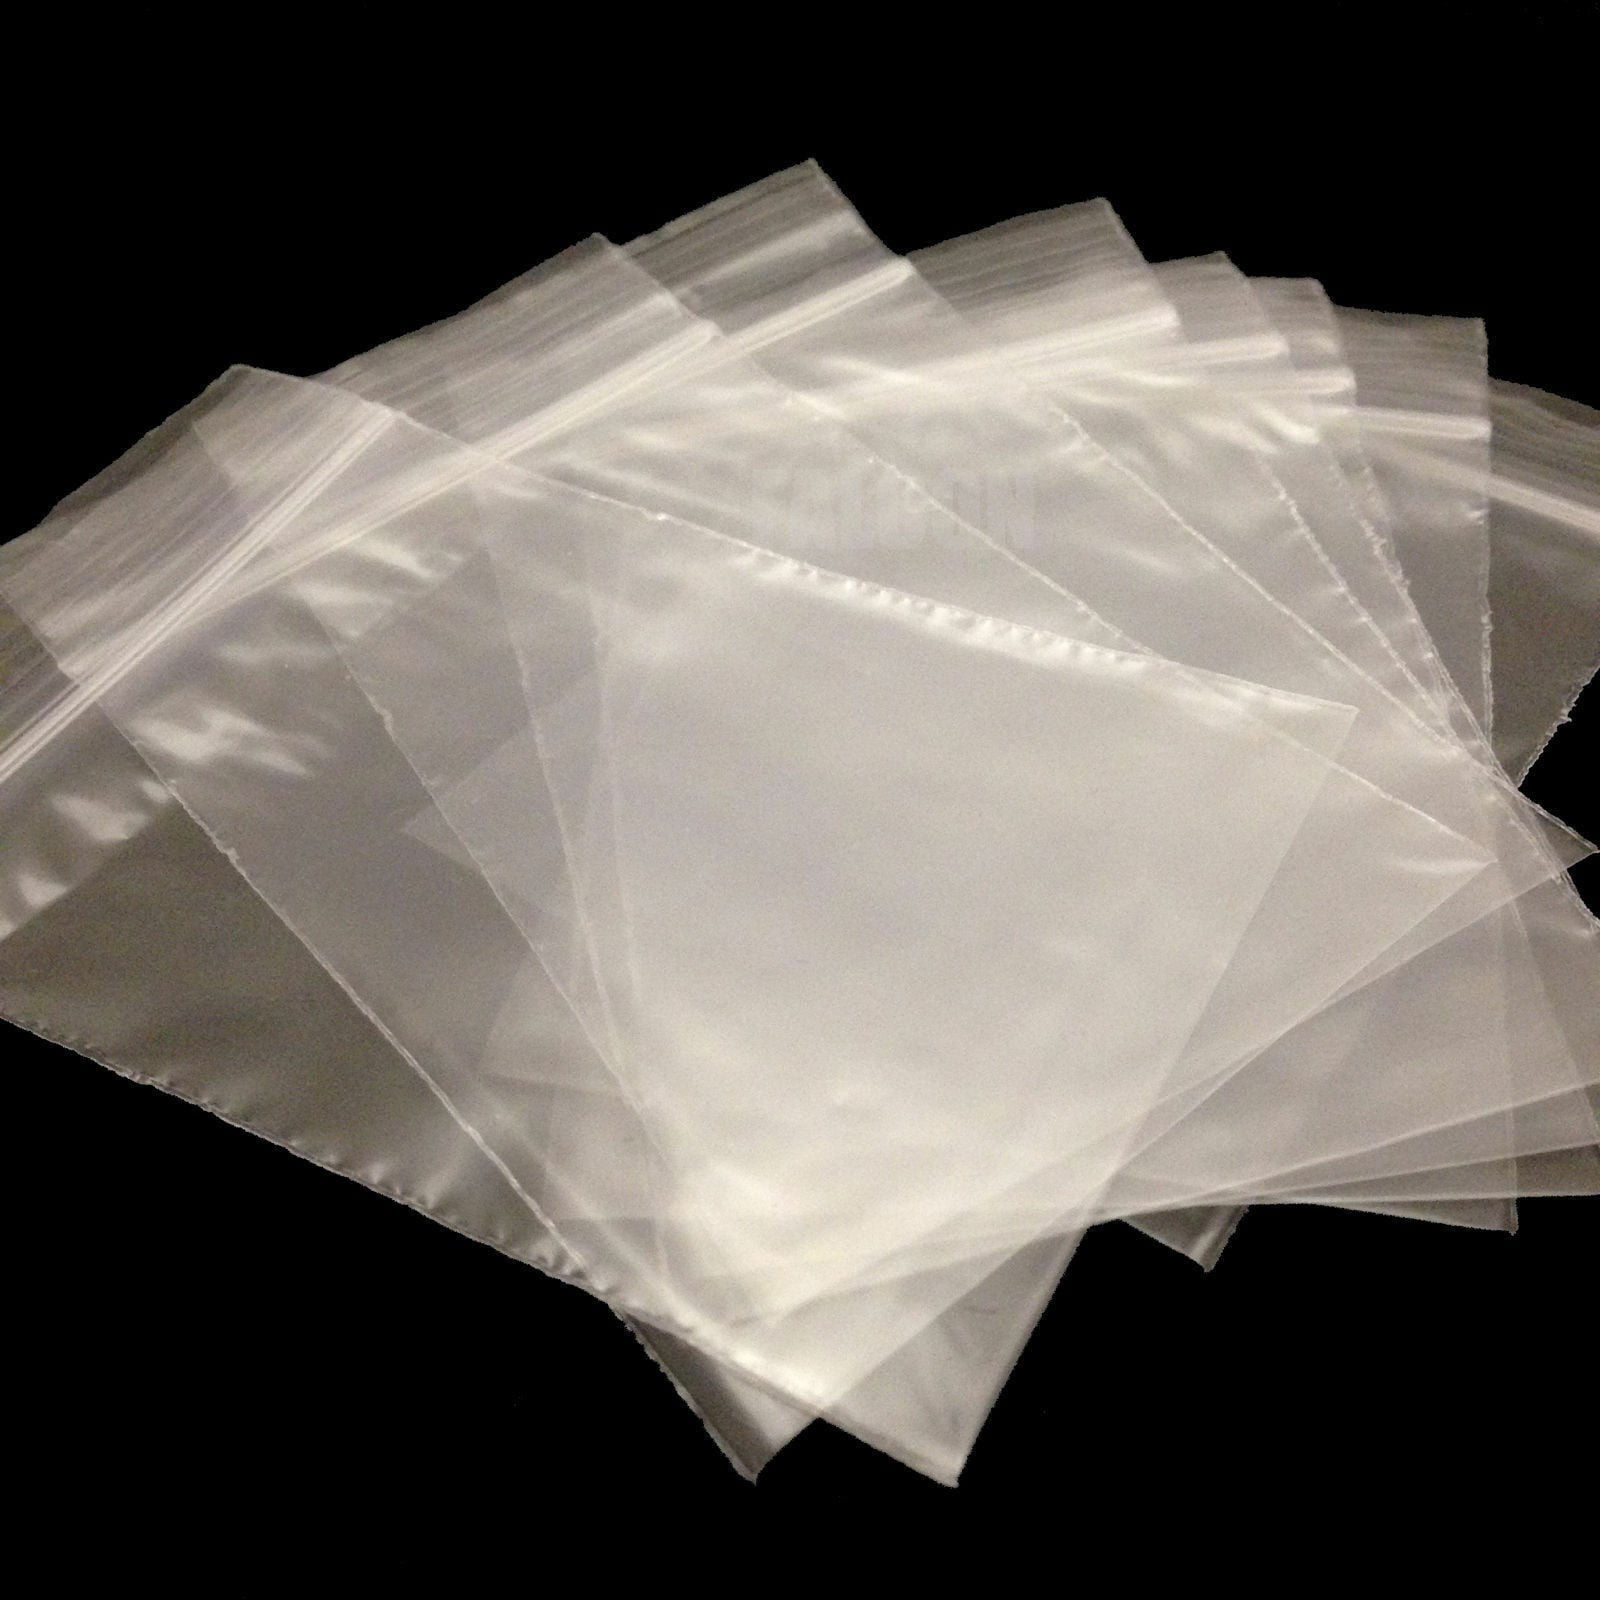 2000 GRIP SEAL BAGS Zip Self Resealable Clear Polythene Poly Plastic 3.5" x 4.5" 